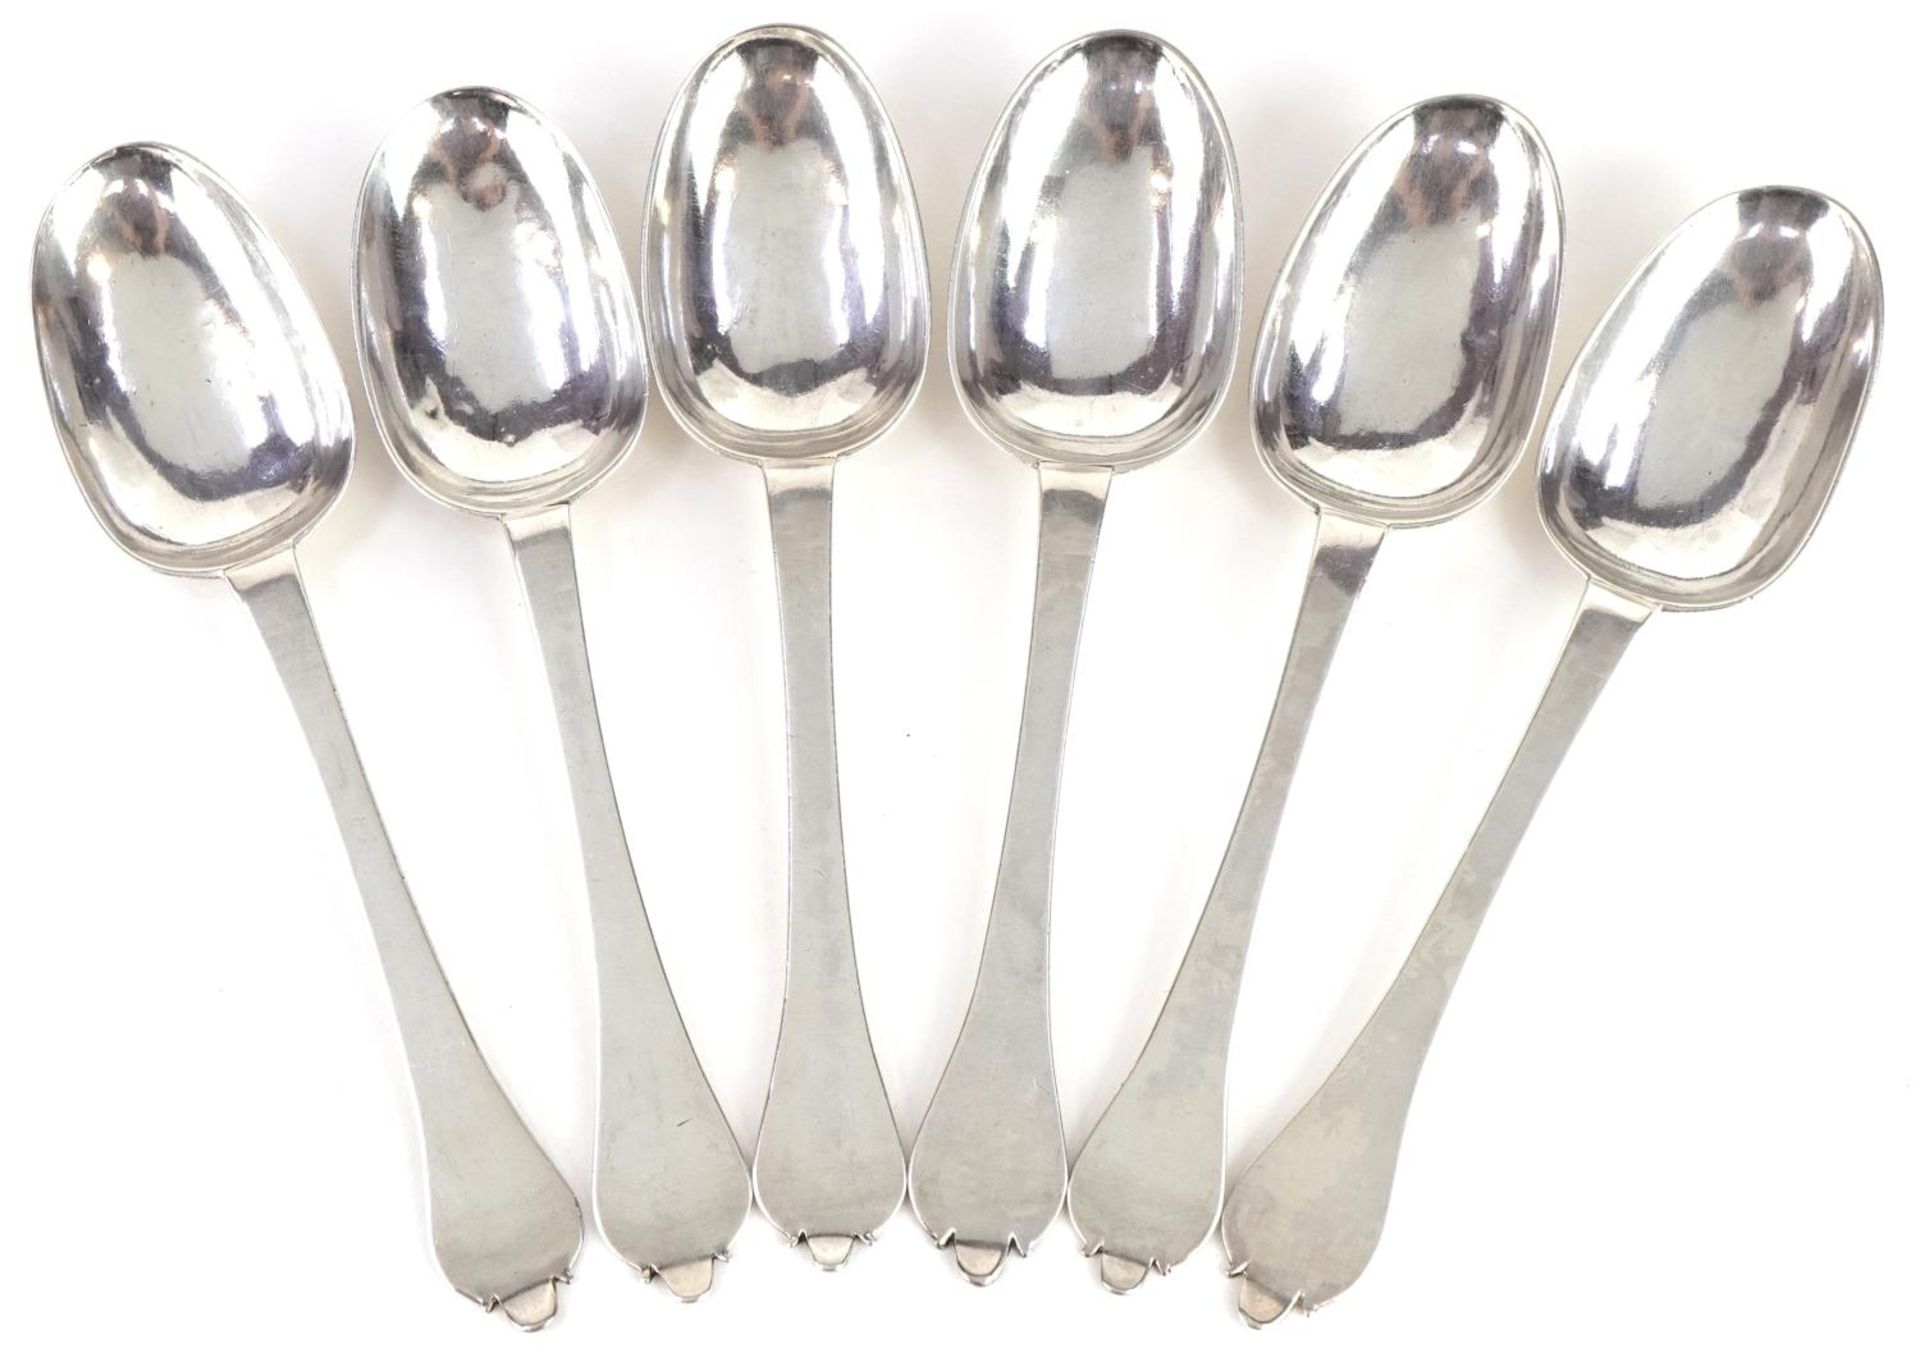 Rare set of six William & Mary silver trefid spoons with rat's tails, each with scratched initials E